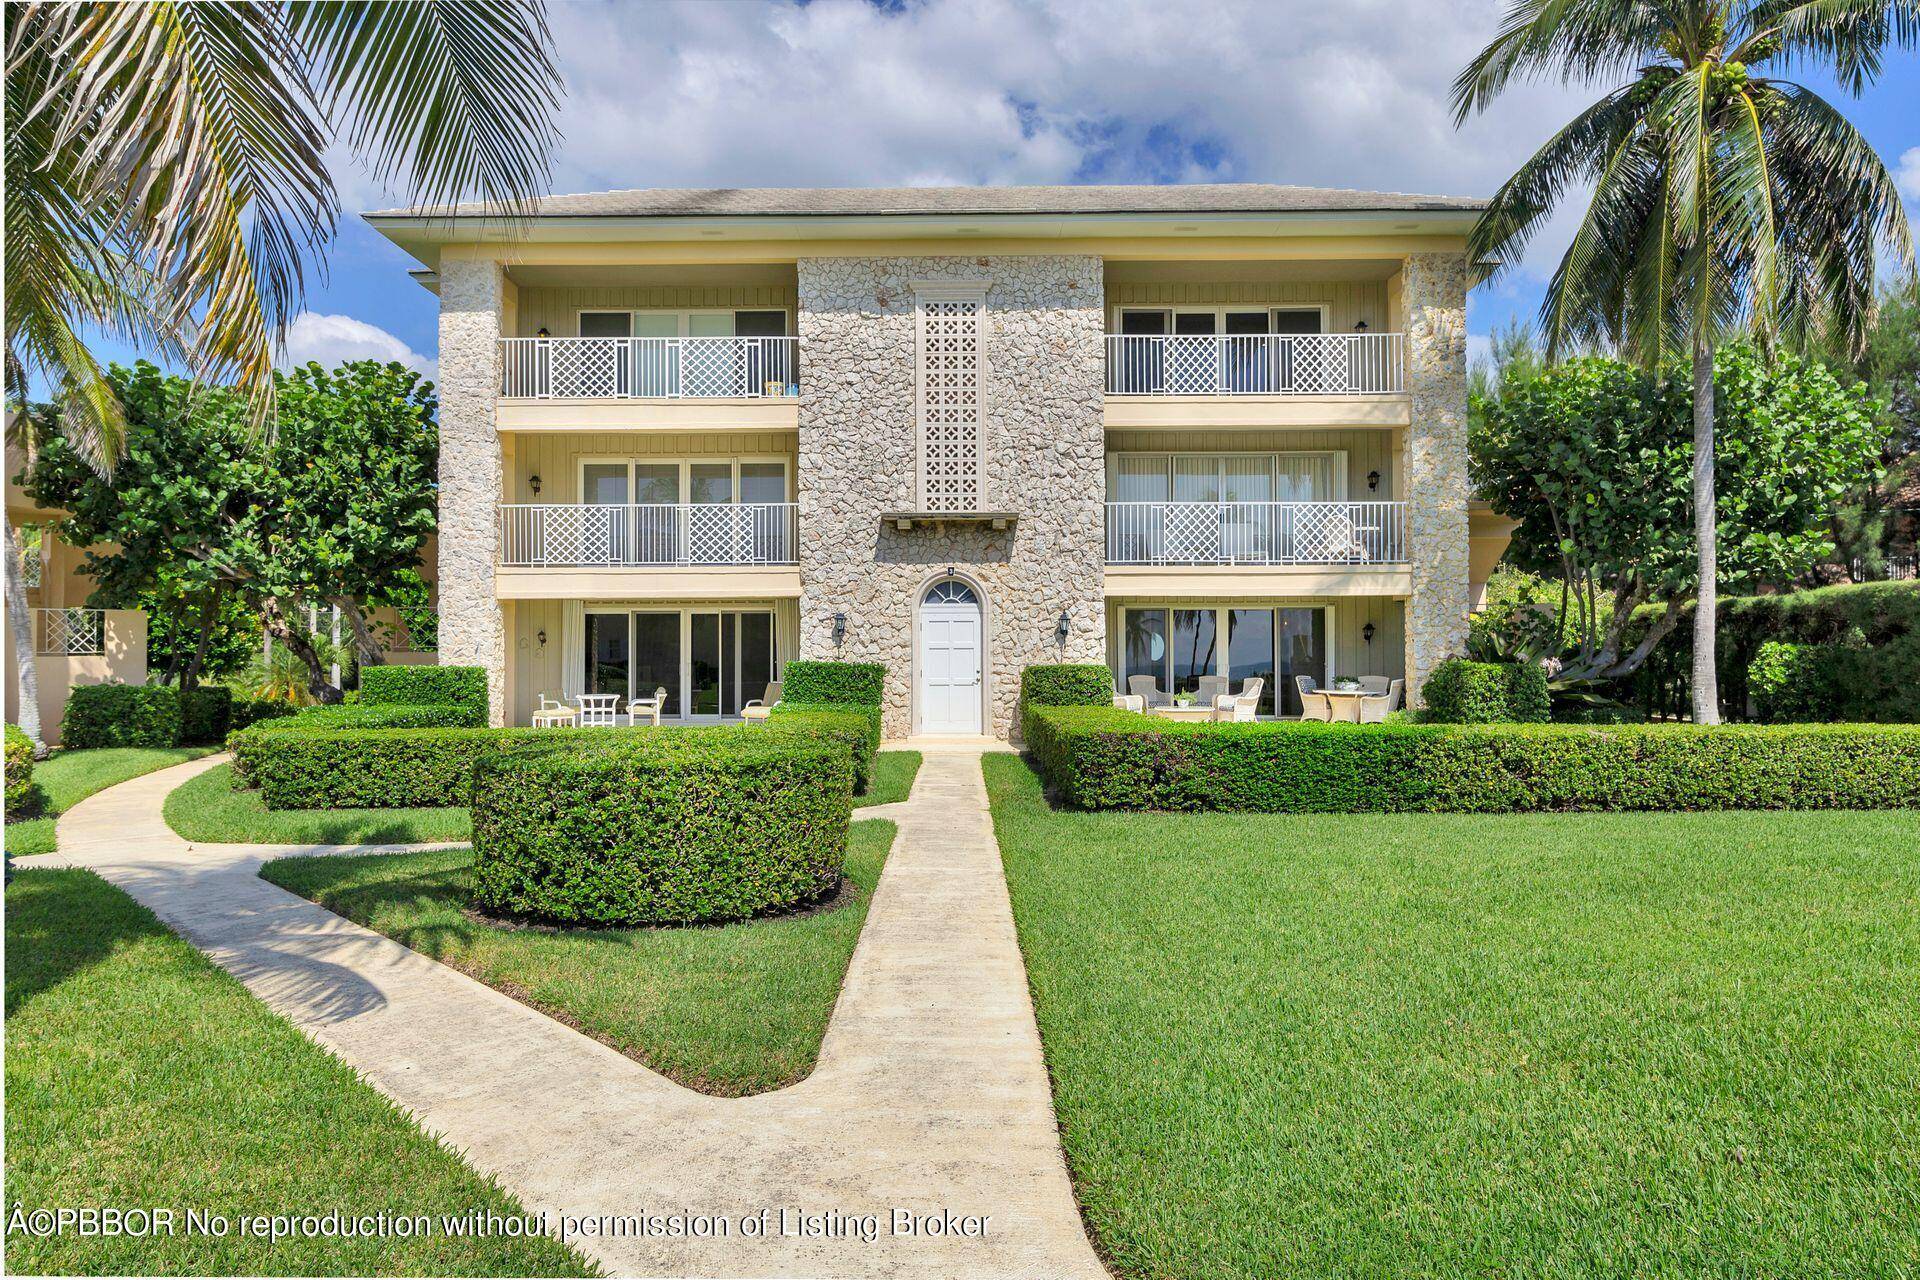 This is a rare opportunity to rent this beautiful apartment in desirable Bermuda High South in Delray Beach !